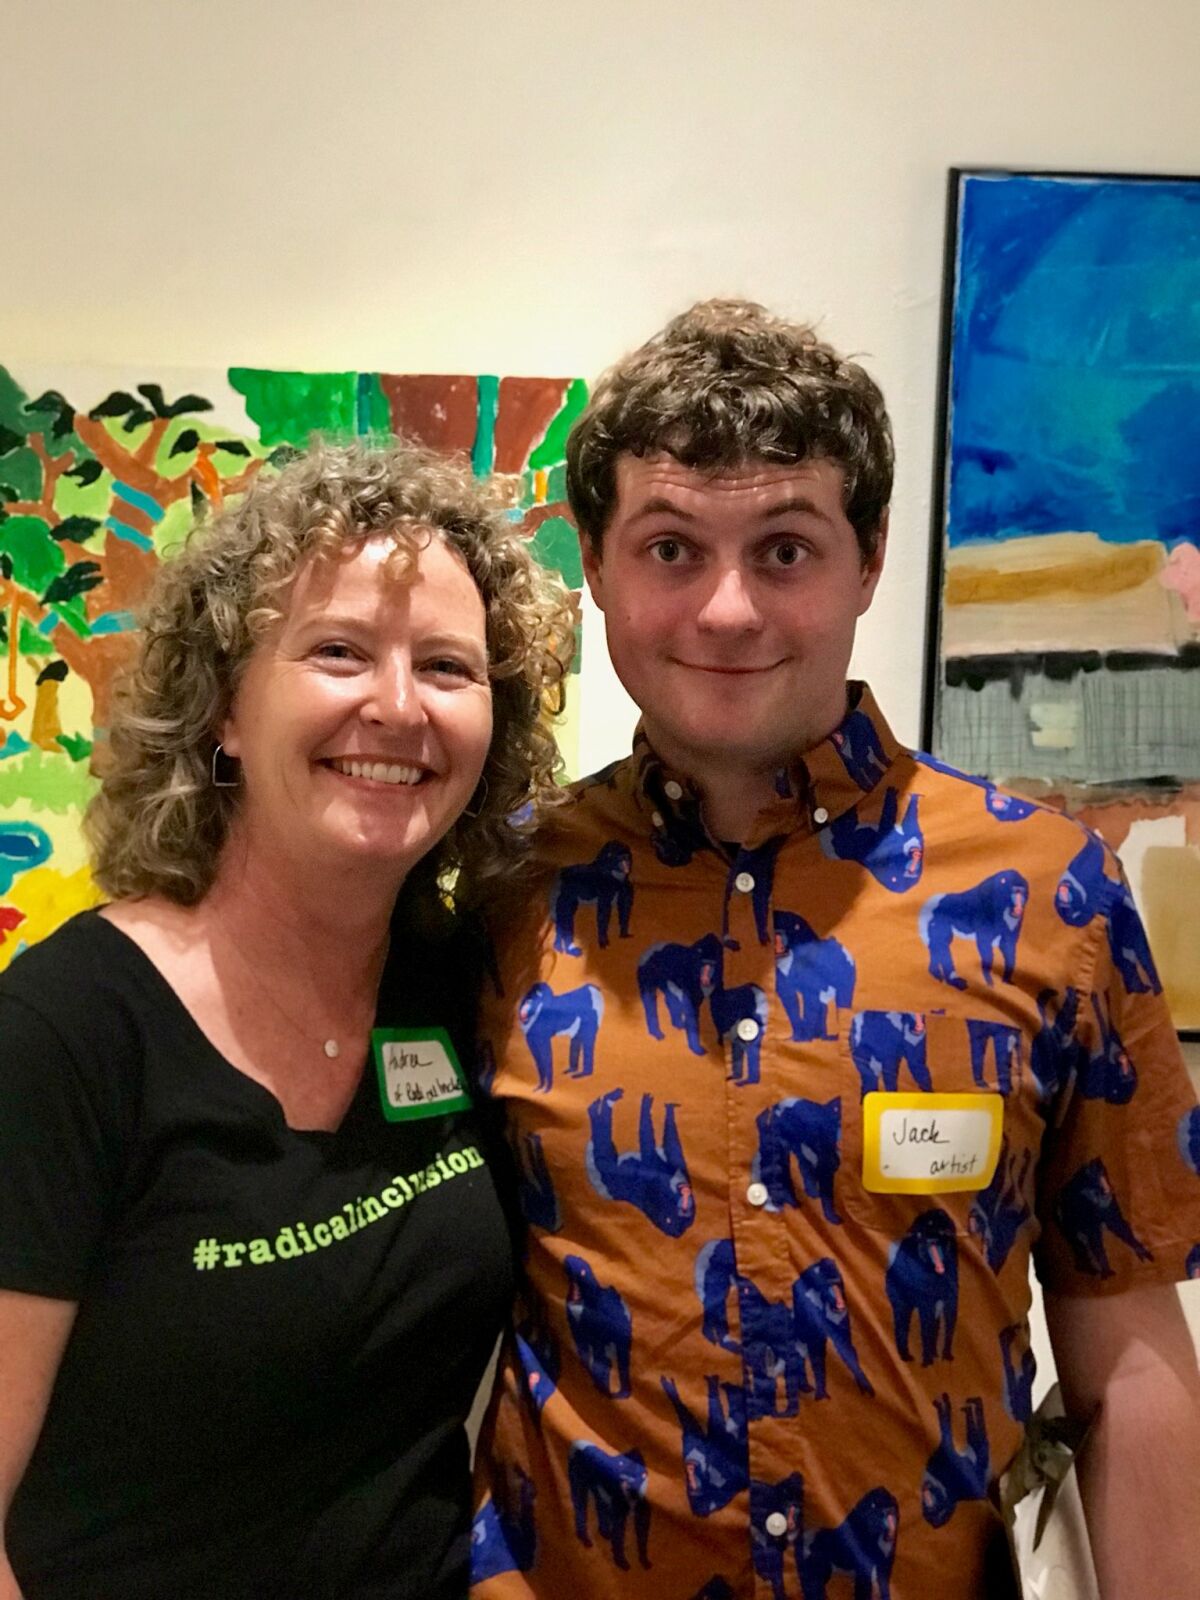 Solana Beach resident and author Andrea Moriarty joined Jack Medved, an artist who is autistic, at the opening of the "Radical Inclusion" art exhibition on Aug. 3.